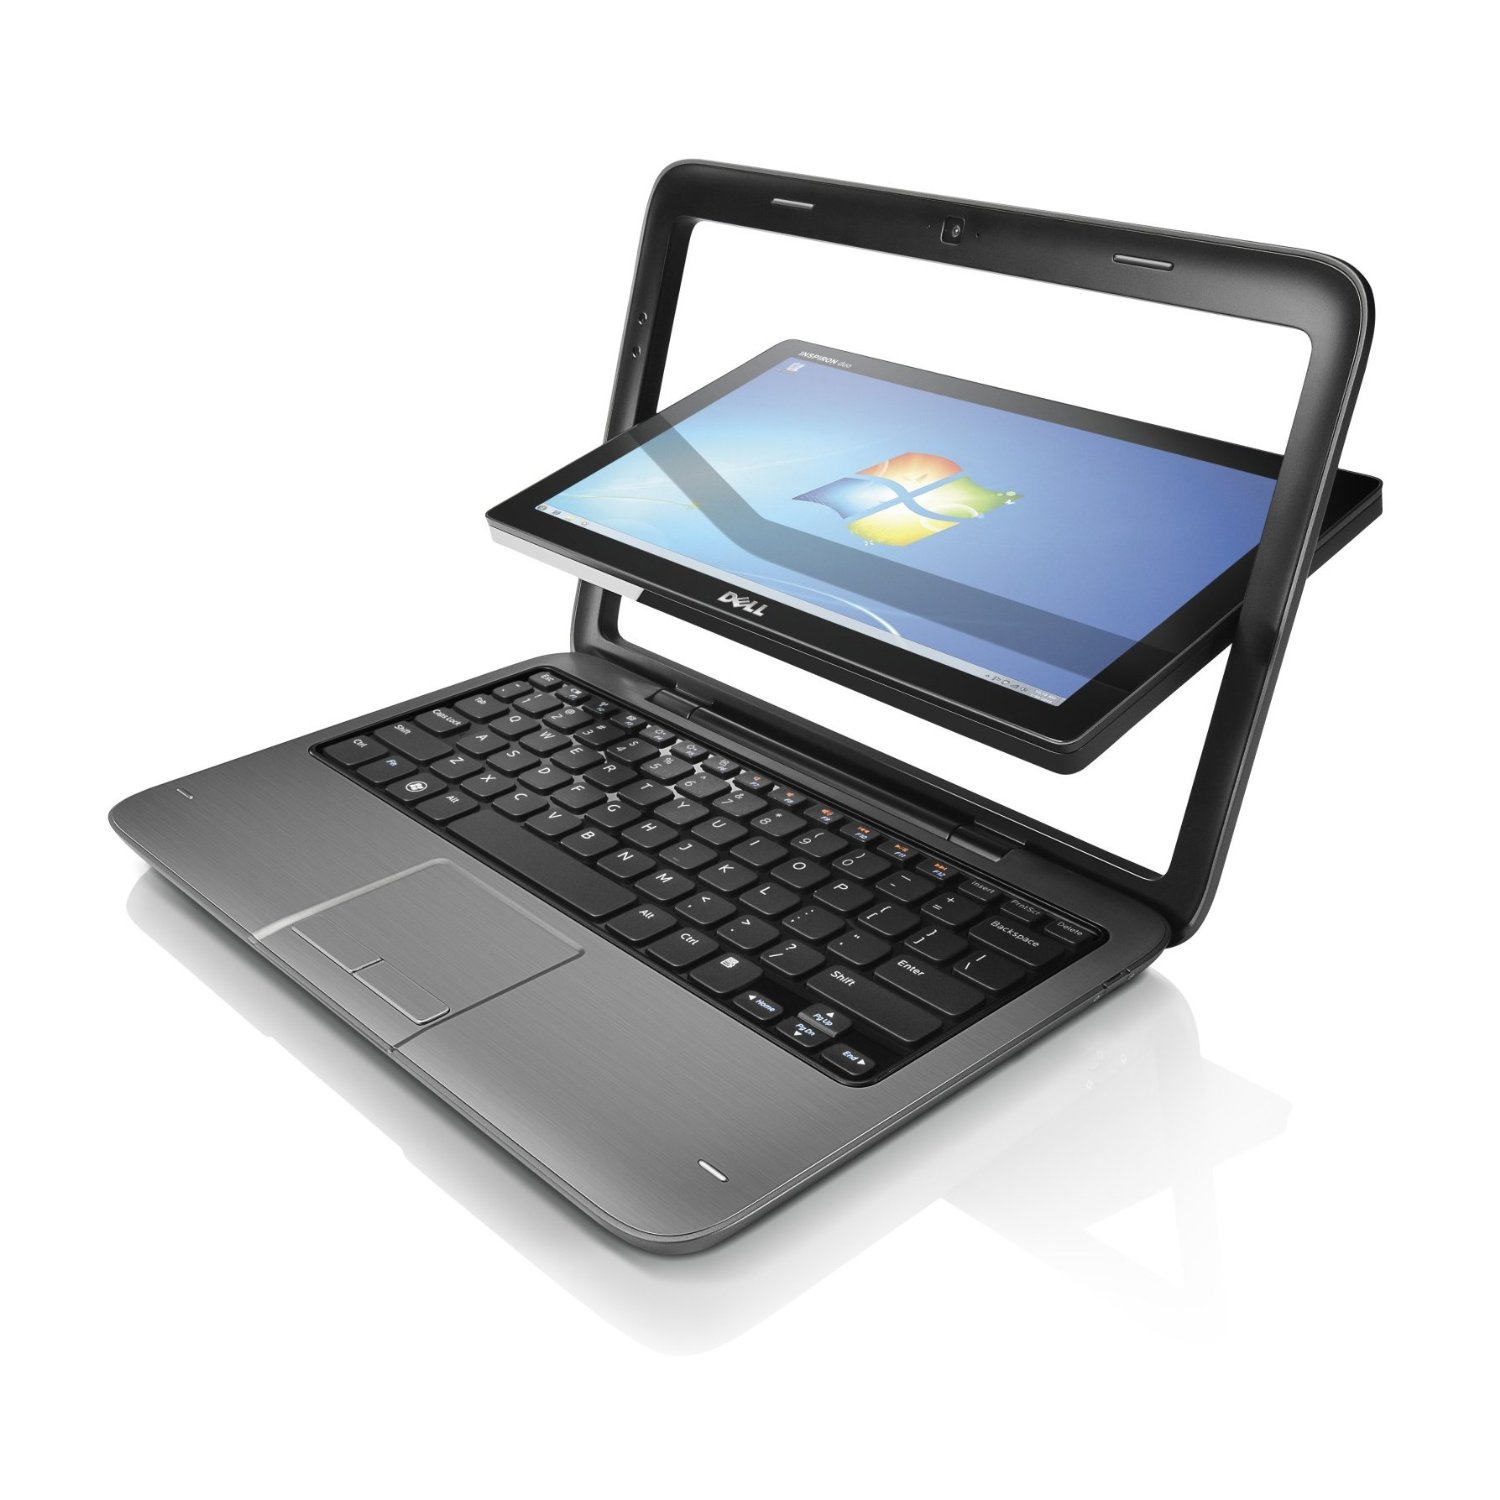 http://thetechjournal.com/wp-content/uploads/images/1109/1316252230-dell-inspiron-duo-id4495fnt-convertible-tabletlaptop--7.jpg